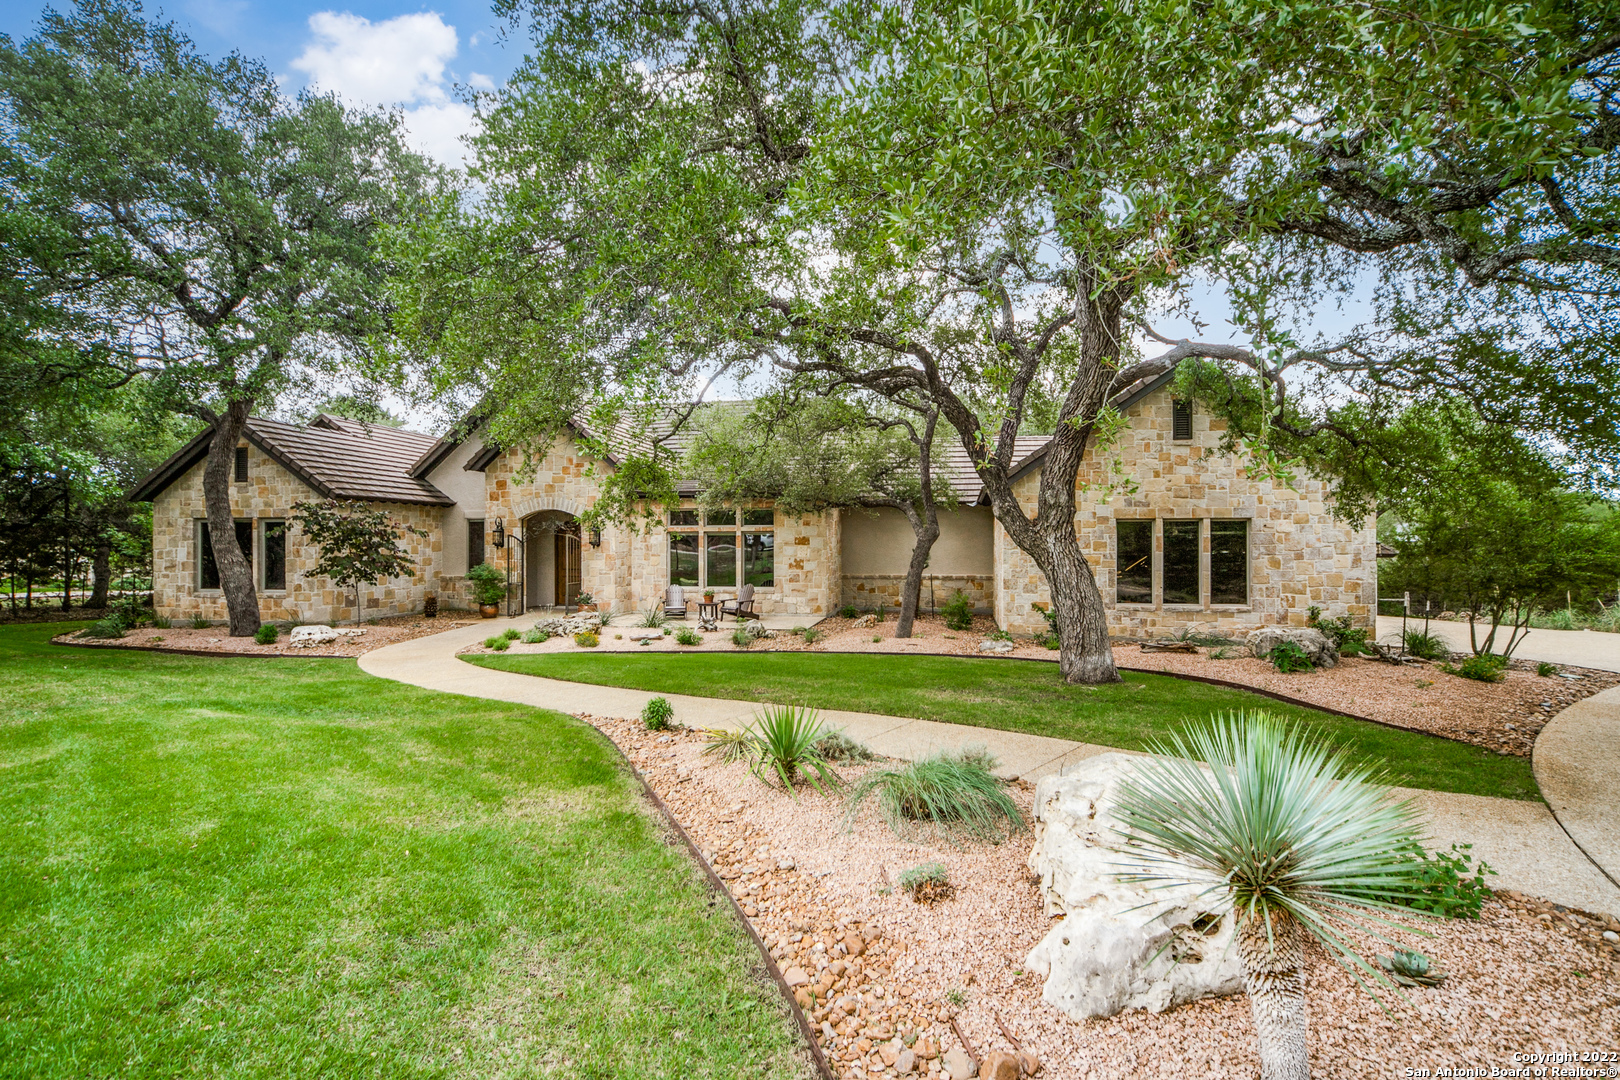 Find an escape from the hustle and bustle of the city with this gorgeous Hill Country gem. Nestled on an expansive lot with a bluff view and mature trees, this stunning countryside retreat's stone and stucco exterior opens to reveal a stately interior filled with quality craftsmanship. Rustic charm is found throughout the home's open floor plan in the form of high ceilings with exposed wood beams, tile and hardwood floors, arched doorways and exquisite mouldings. Located next to the grand double door entry is the formal dining room. The spacious family room features a patio access, surround sound wiring and a stone fireplace that extends to the crest of the cathedral ceiling. Take your culinary abilities to new heights in the spacious island kitchen, complete with granite counters, tile backsplash with a mosaic centerpiece, stainless steel appliances, a casual dining nook with bow windows and pendant lighting suspended over an eat-in breakfast bar. Boasting a tray ceiling, bow windows and a walk-in closet, the relaxing primary suite exudes an aura of refined elegance. Equipped with dual vanities, an inset whirlpool tub and separate shower, the primary en suite bath is perfect for melting away stress after a long day. Other distinguishing features include a private office and reading room with French doors and custom built-ins, as well as well-appointed secondary bedrooms. Just behind the home is an incredible outdoor paradise, which contains a covered patio with an outdoor fireplace, summer kitchen and patio speaker wiring, a Keith Zars pool and waterfall, plenty of mature trees and a detached Casita of 720SF, which includes a large living area, and an additional bedroom and bath. With the casita this house is a total of 4428SF priced at $375/SF. Whole house generator ($26,000) installed in 2021. Social country club membership is available.